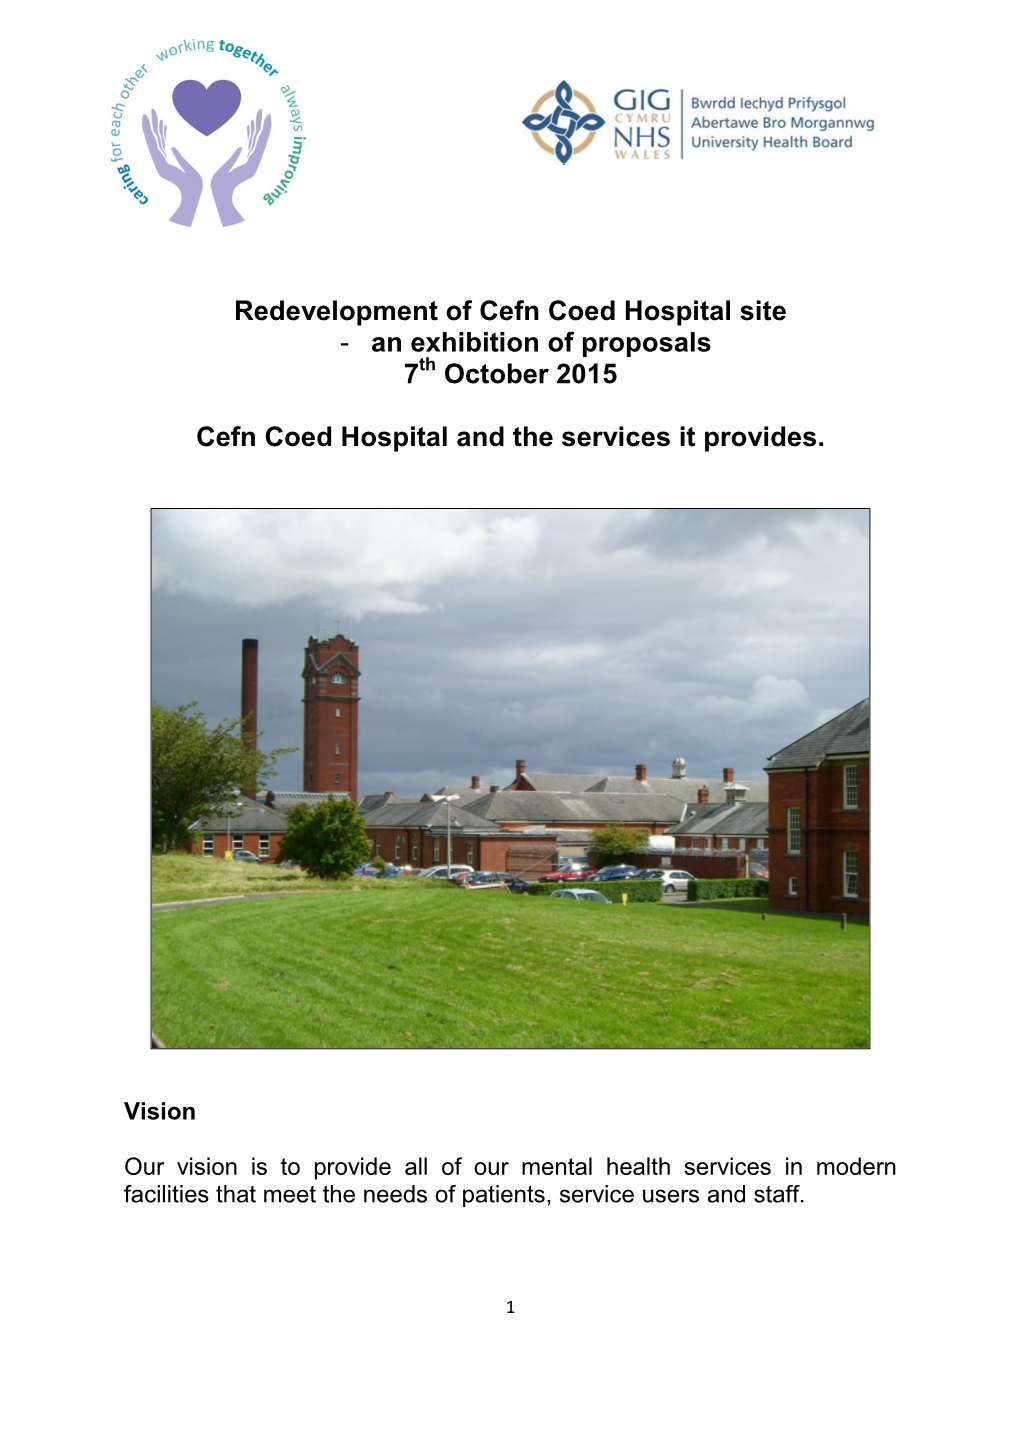 Redevelopment of Cefn Coed Hospital Site - an Exhibition of Proposals 7Th October 2015